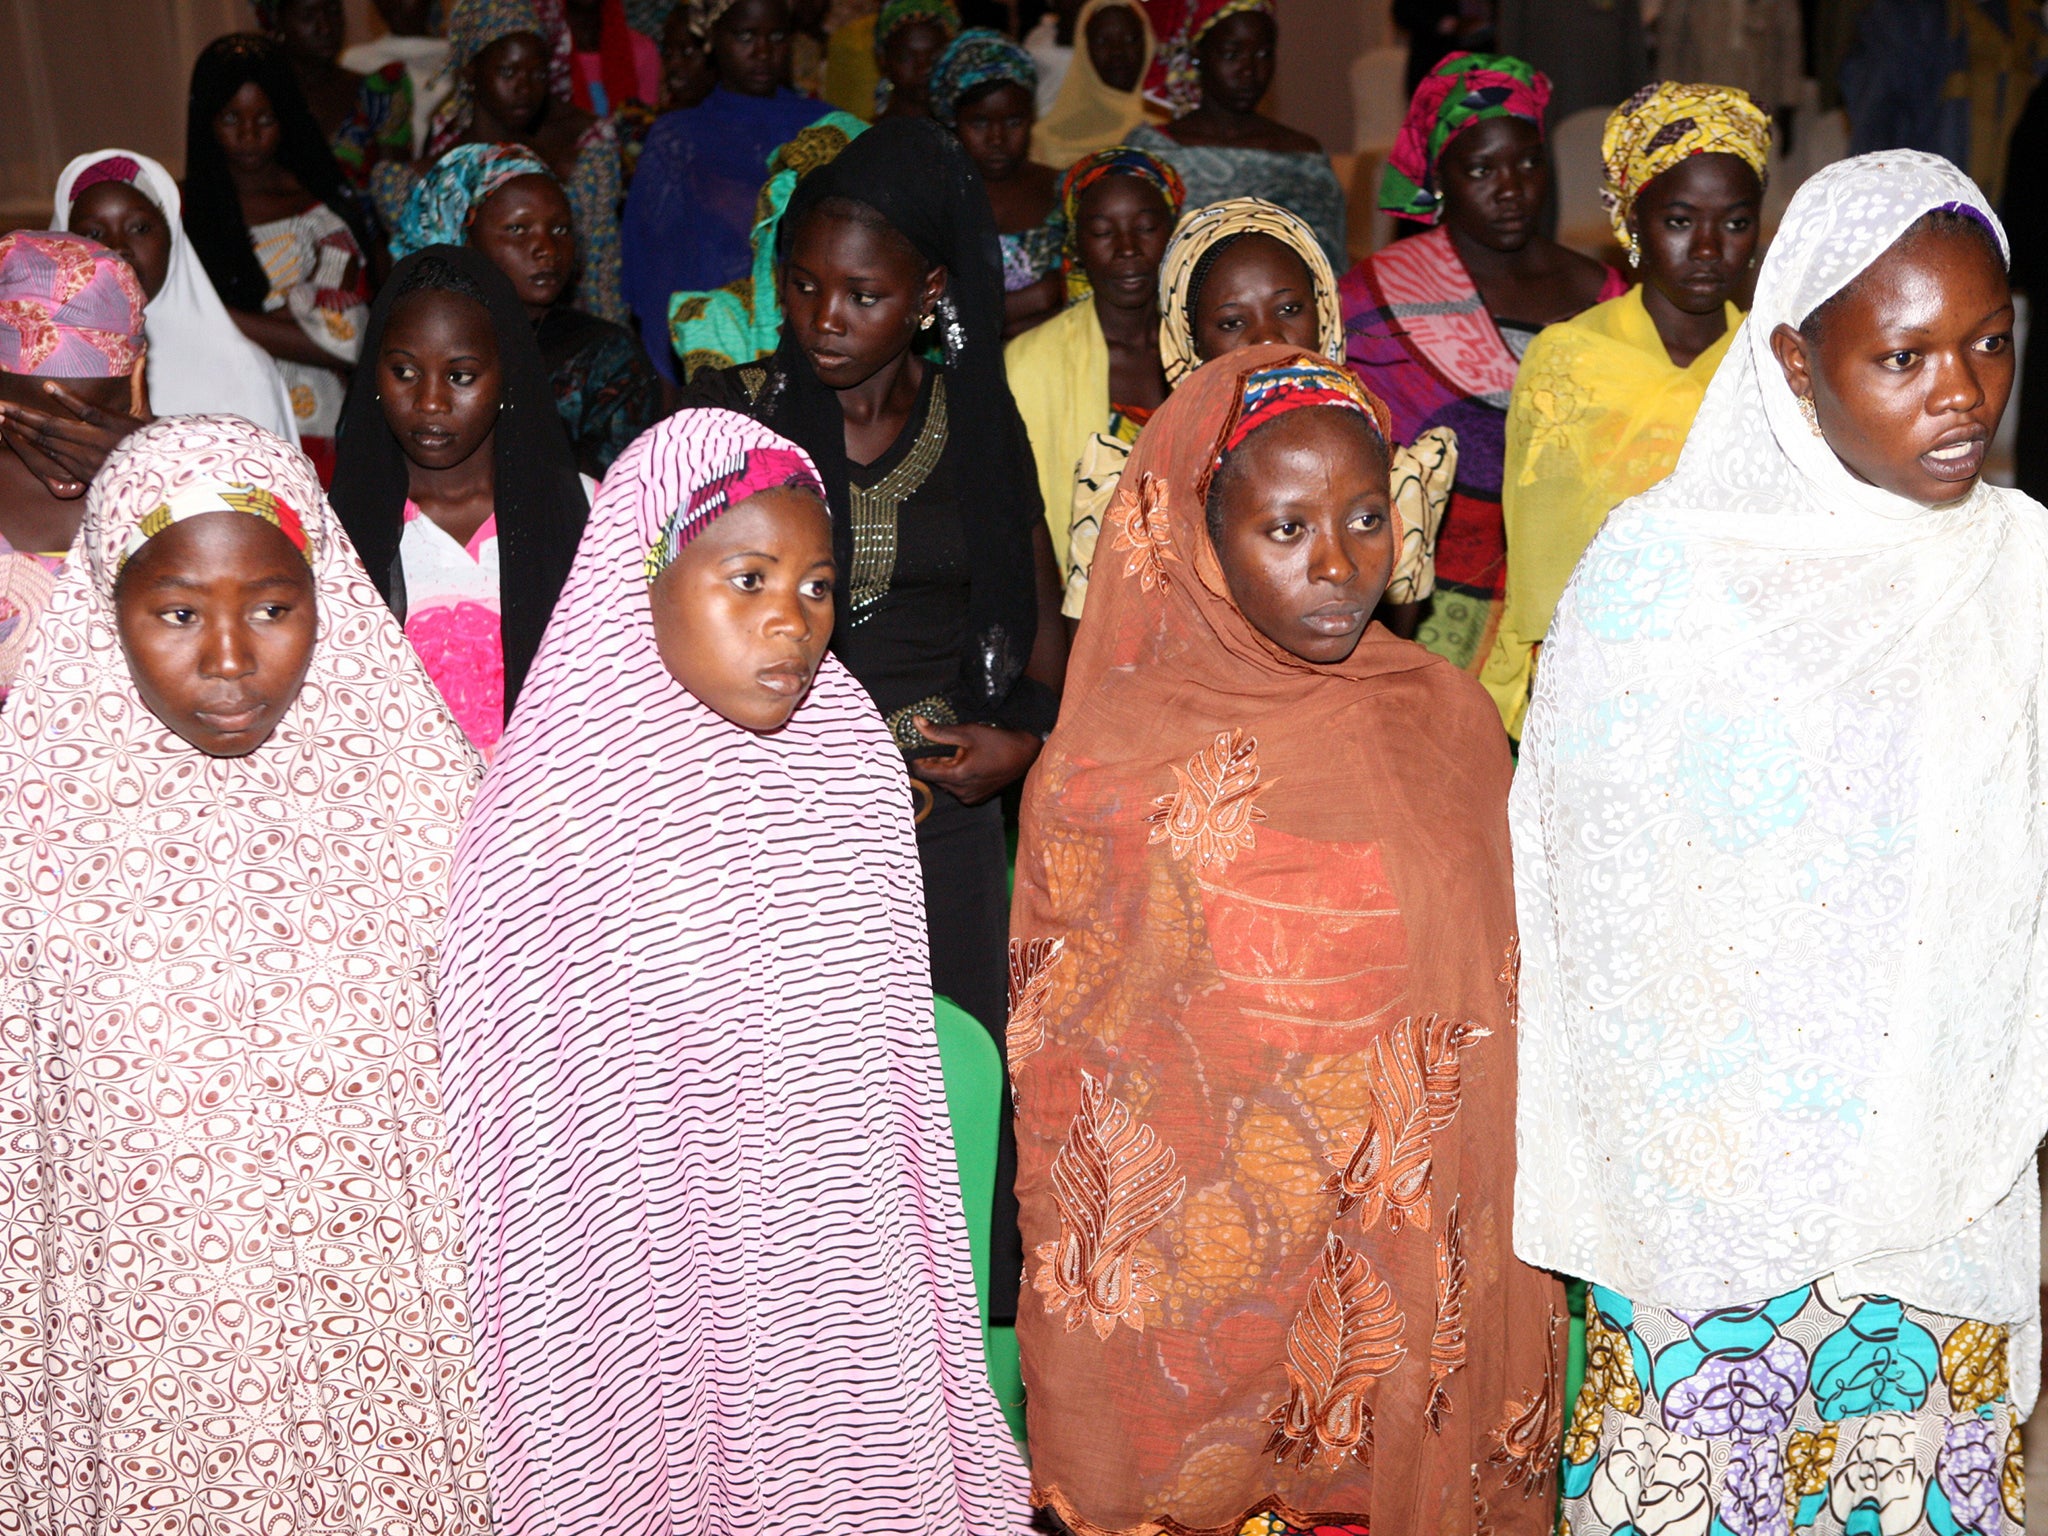 Some of the Chibok schoolgirls who escaped their Boko Haram Islamist captors wait to meet the Nigerian president at the presidency in Abuja on July 22, 2014.